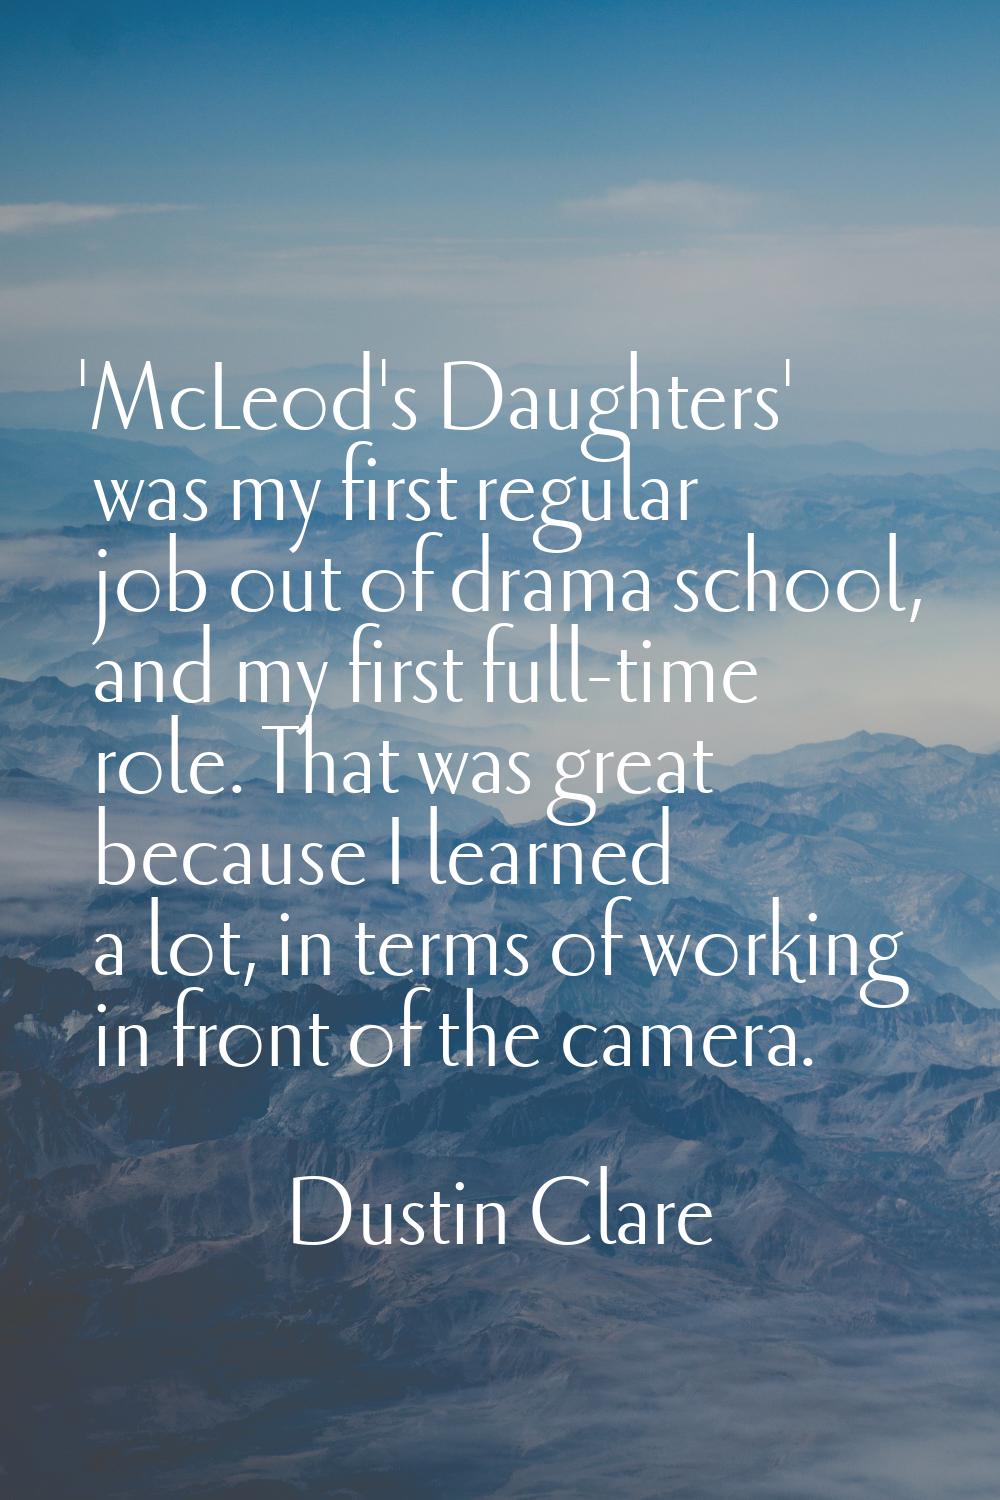 'McLeod's Daughters' was my first regular job out of drama school, and my first full-time role. Tha